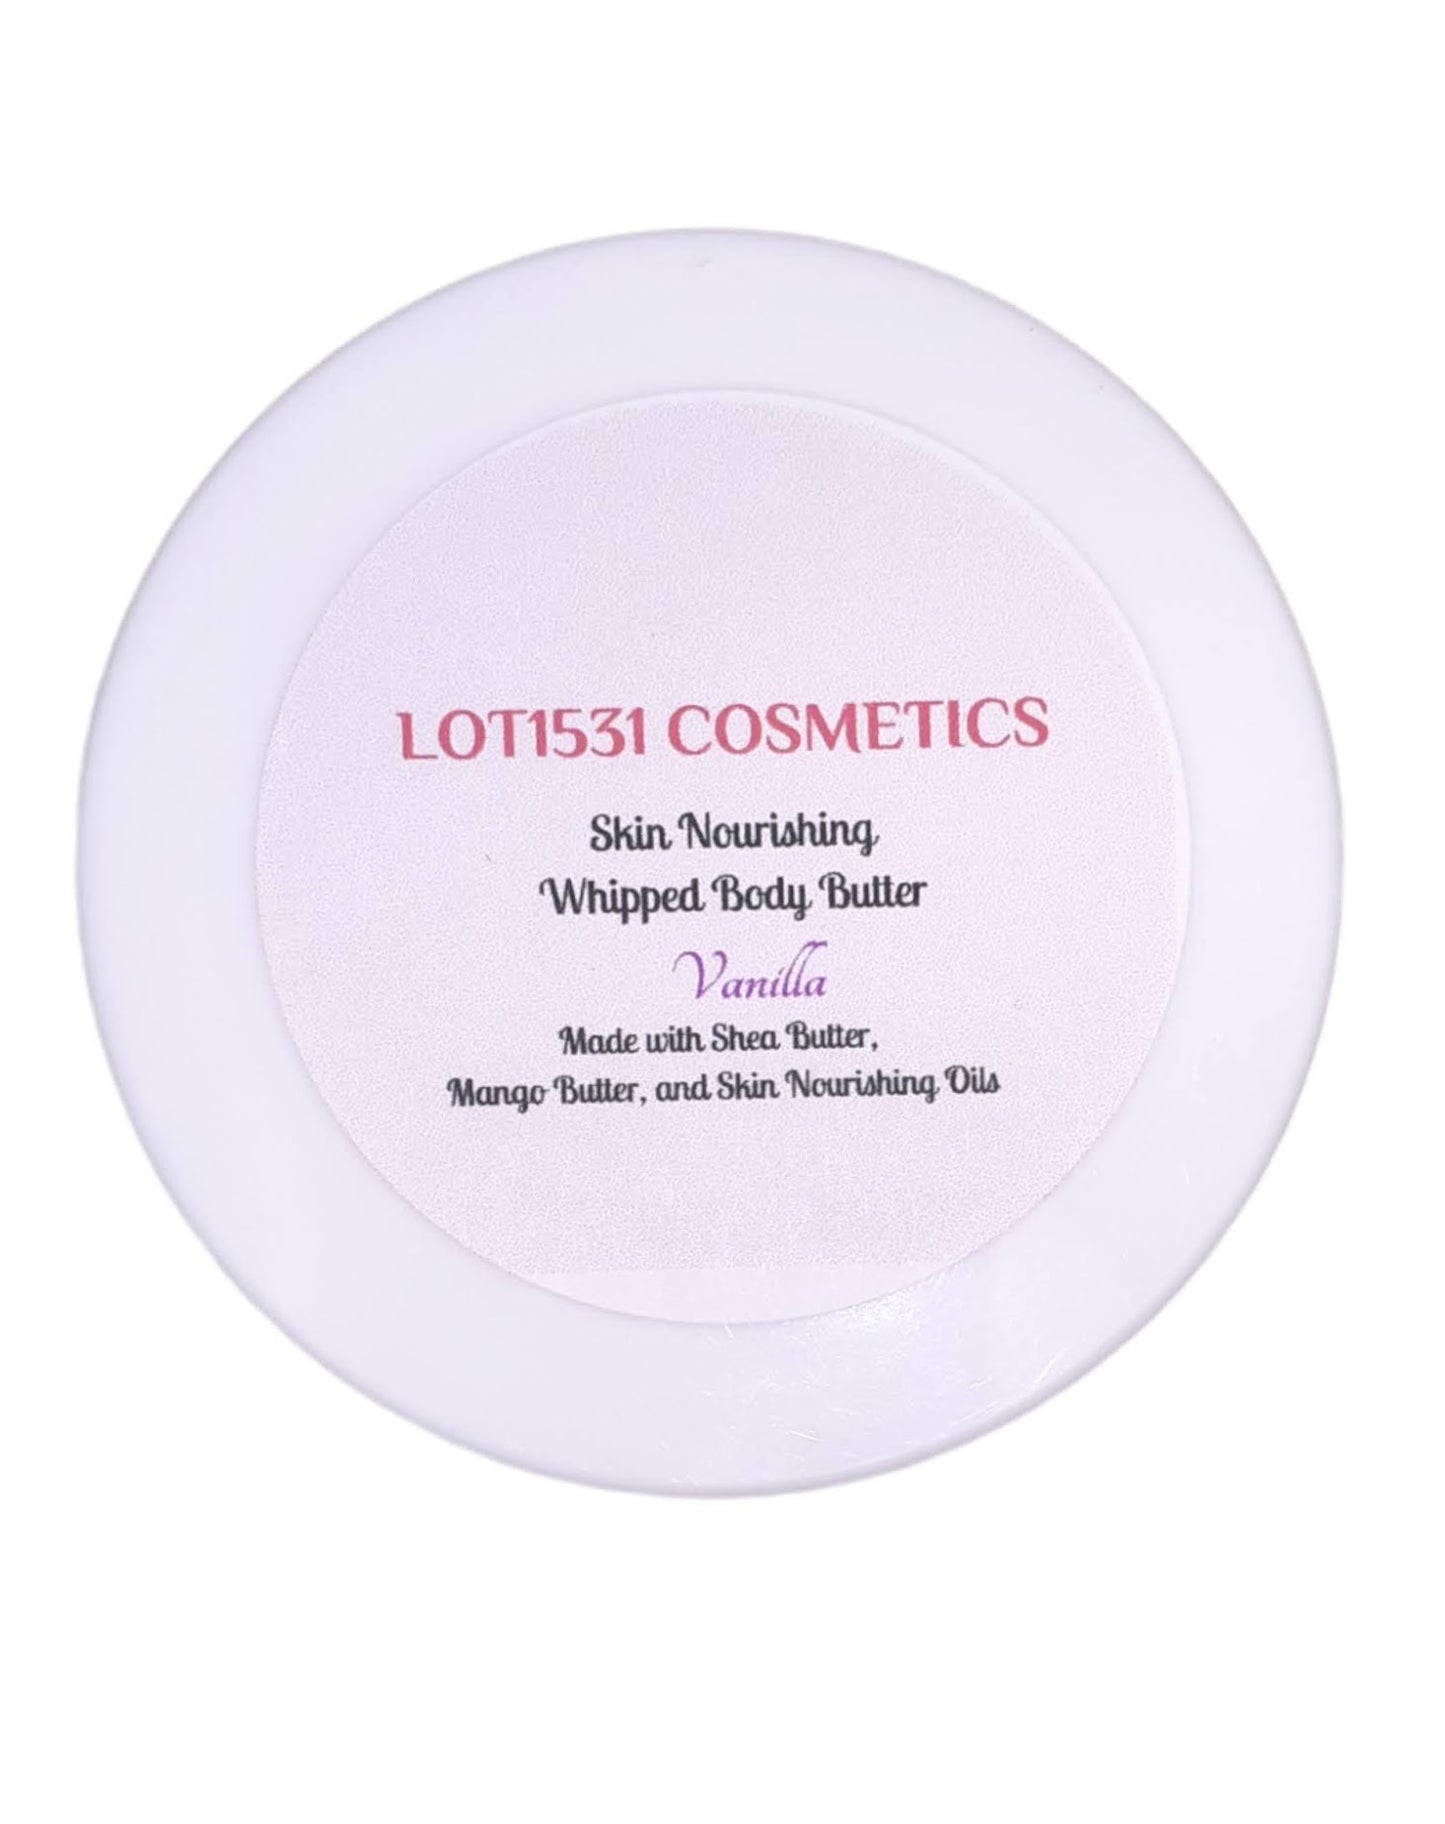 LOT1531 Cosmetics Whipped Body Butter